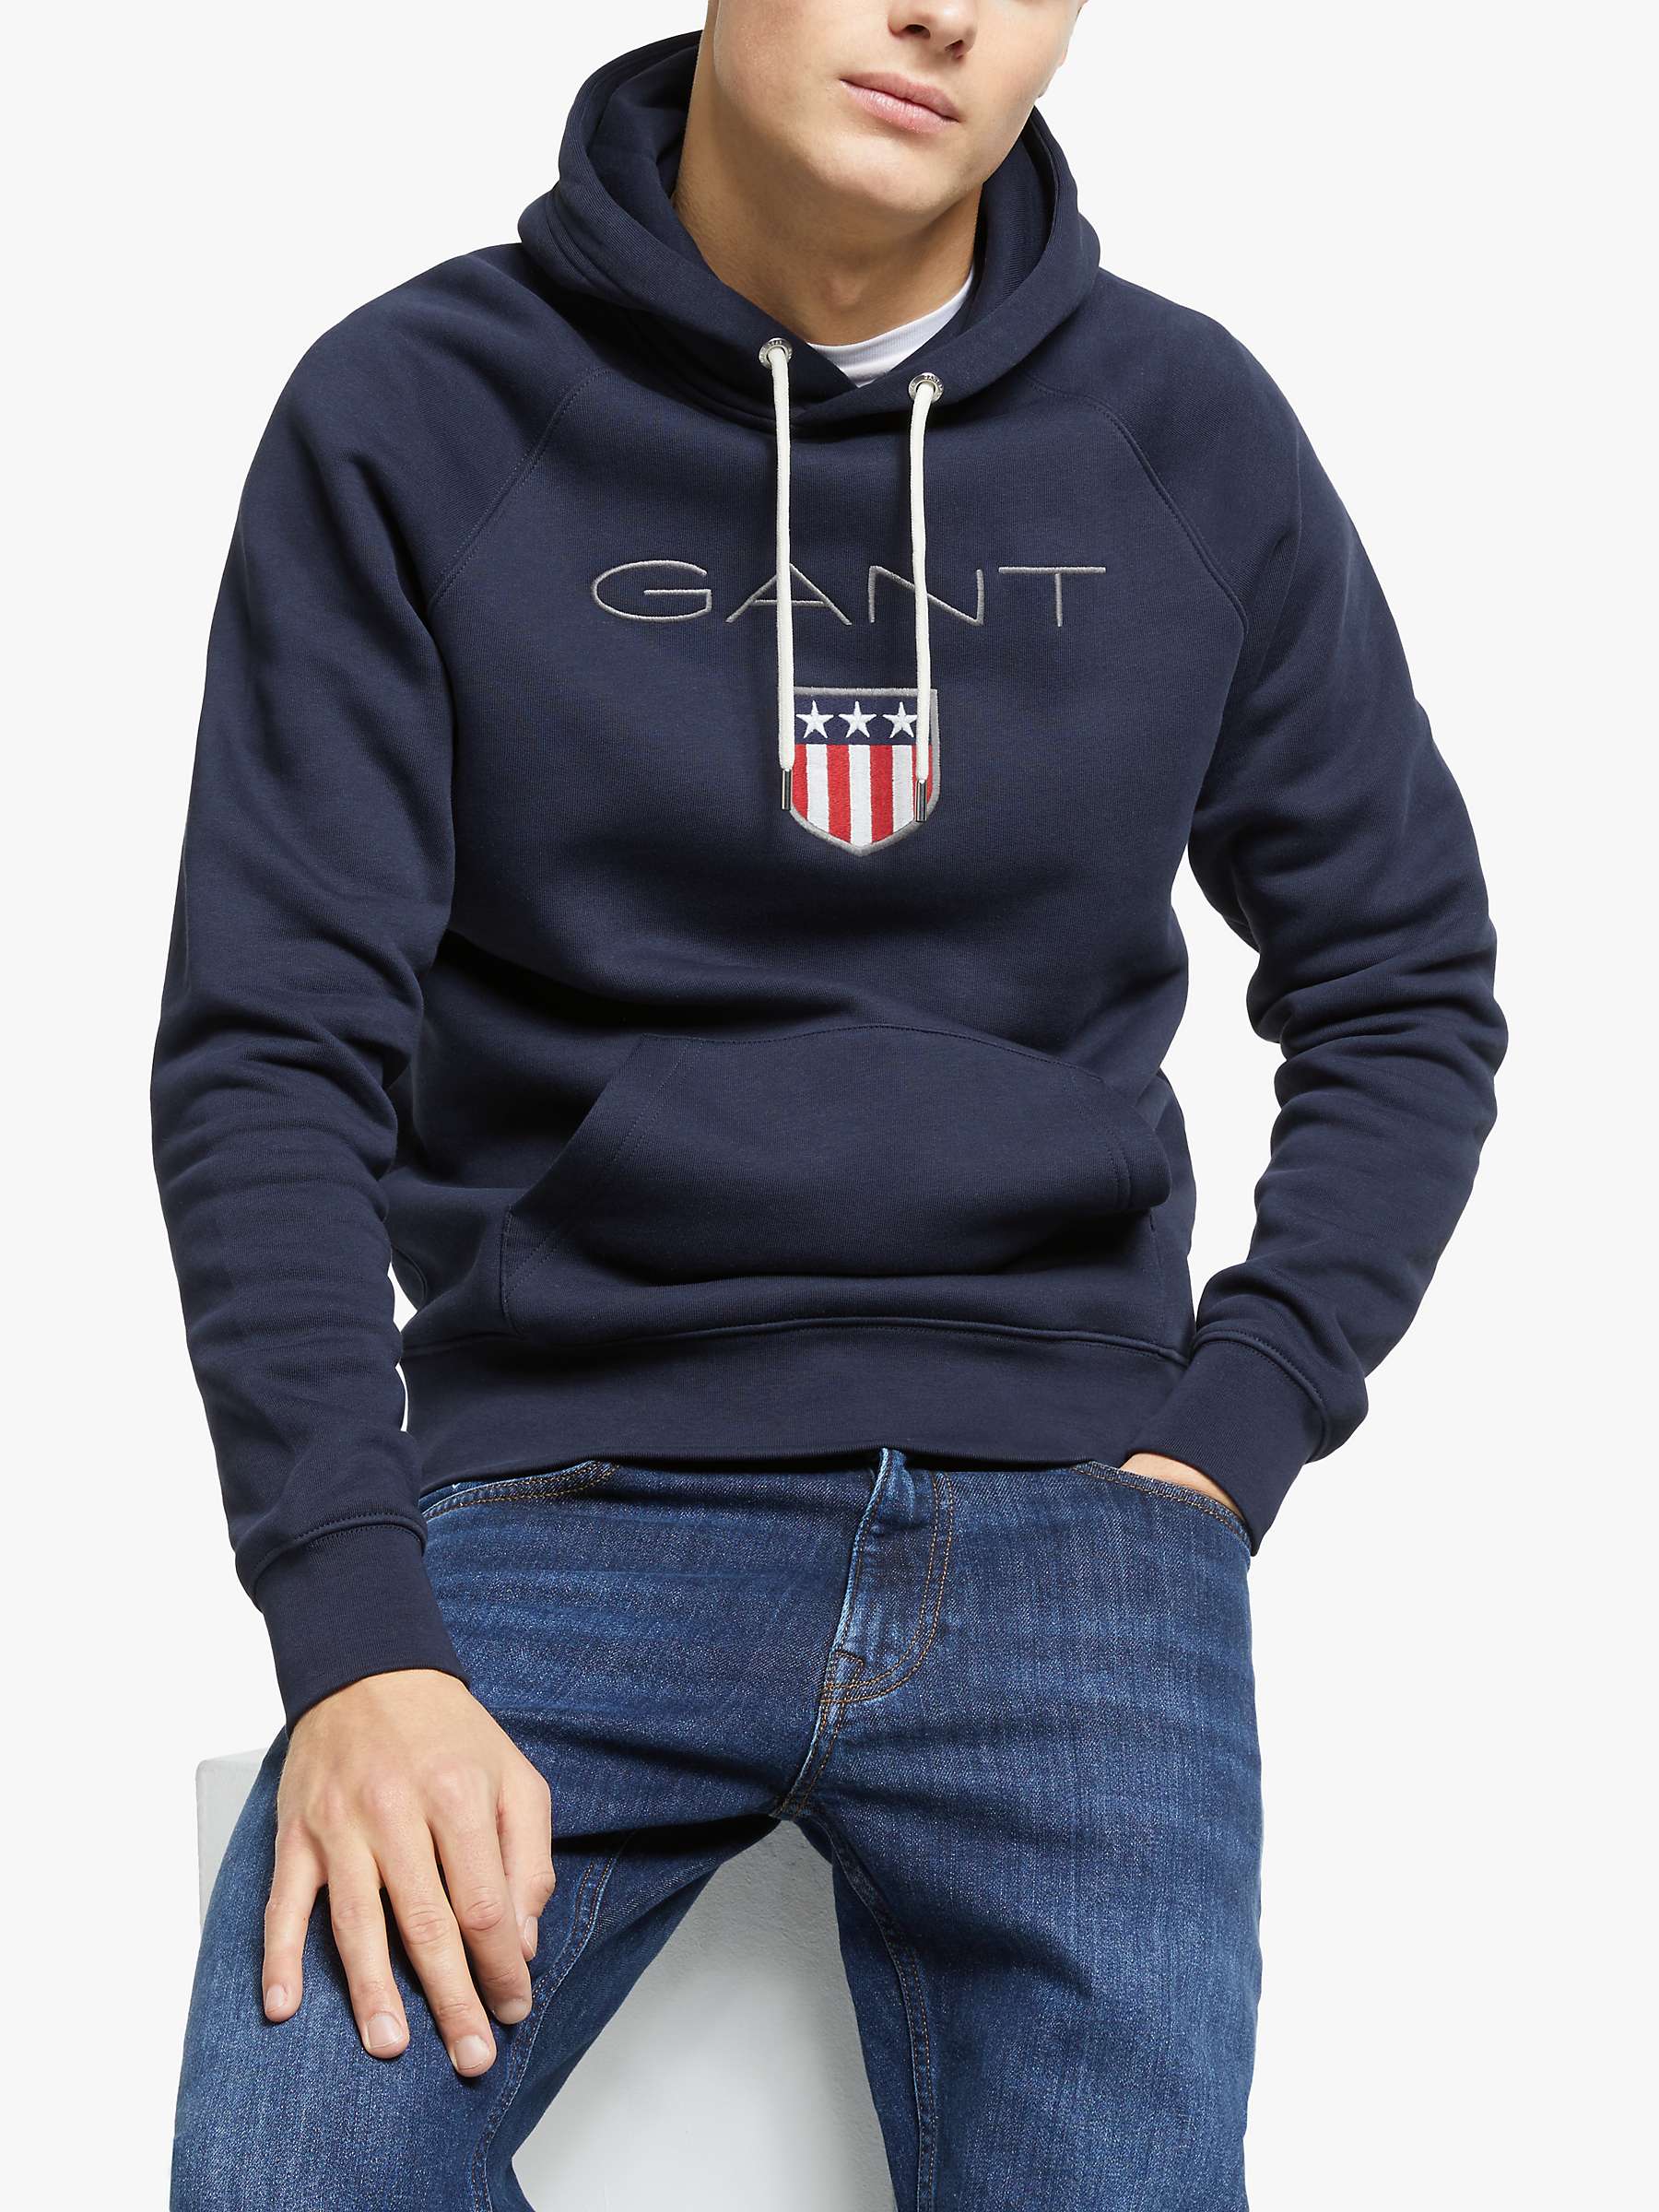 gym and workout clothes Hoodies GANT Cotton D1 Archive Shield Hoodie in Blue for Men Mens Clothing Activewear 